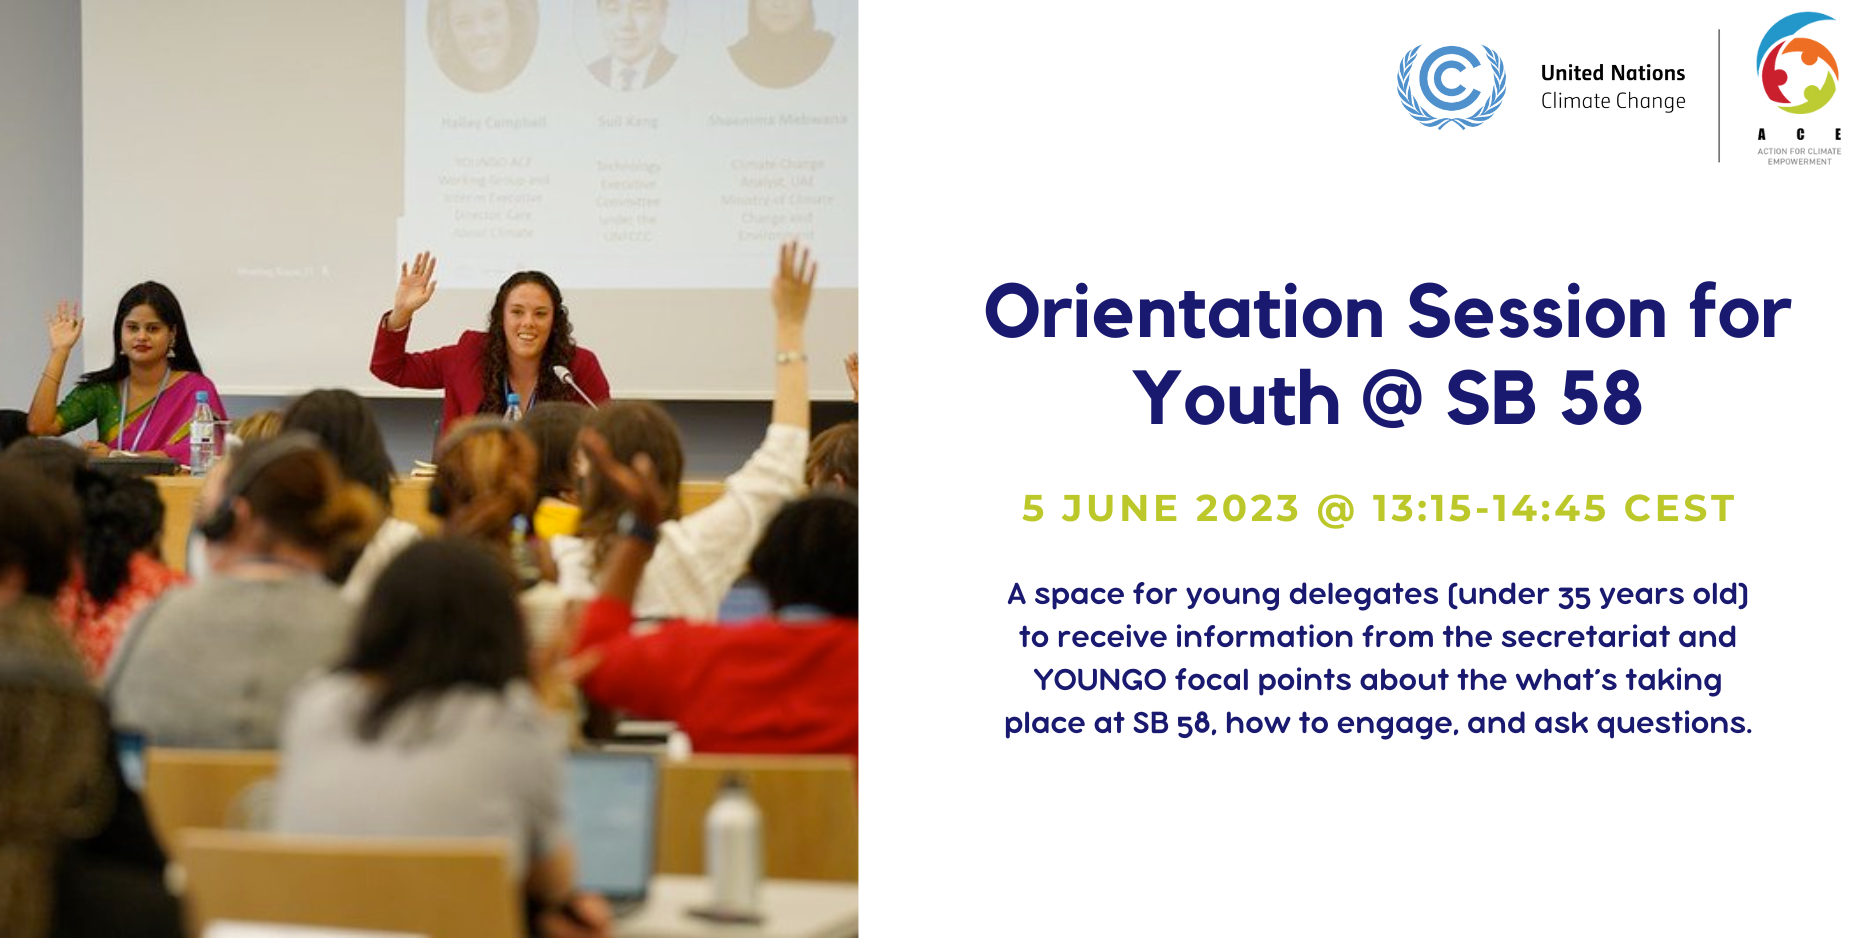 Orientation session for youth